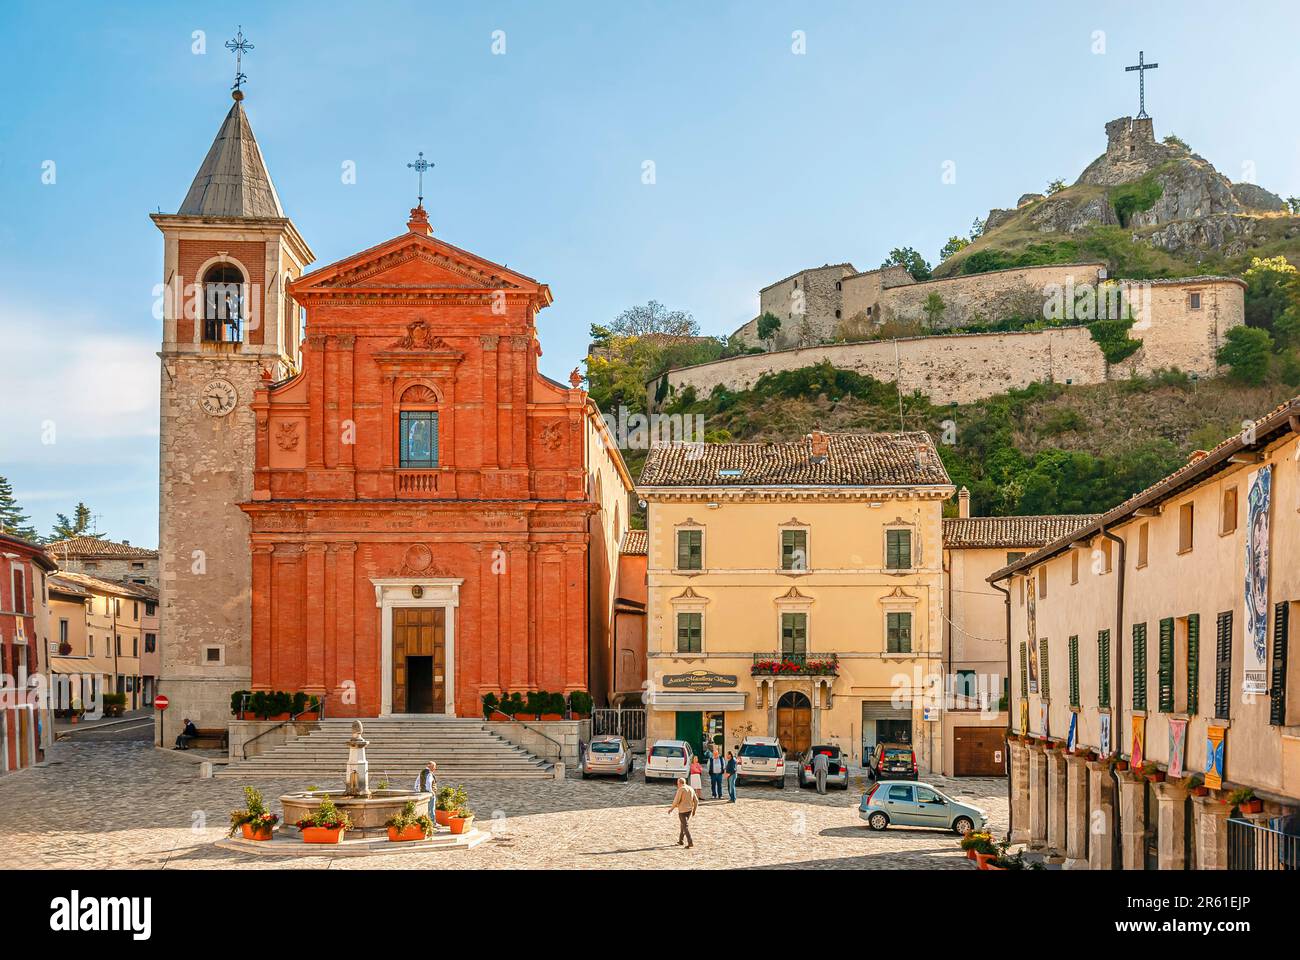 Piazza at the historical town centre of Pennabilli in Emilia Romagna, North Italy. Stock Photo